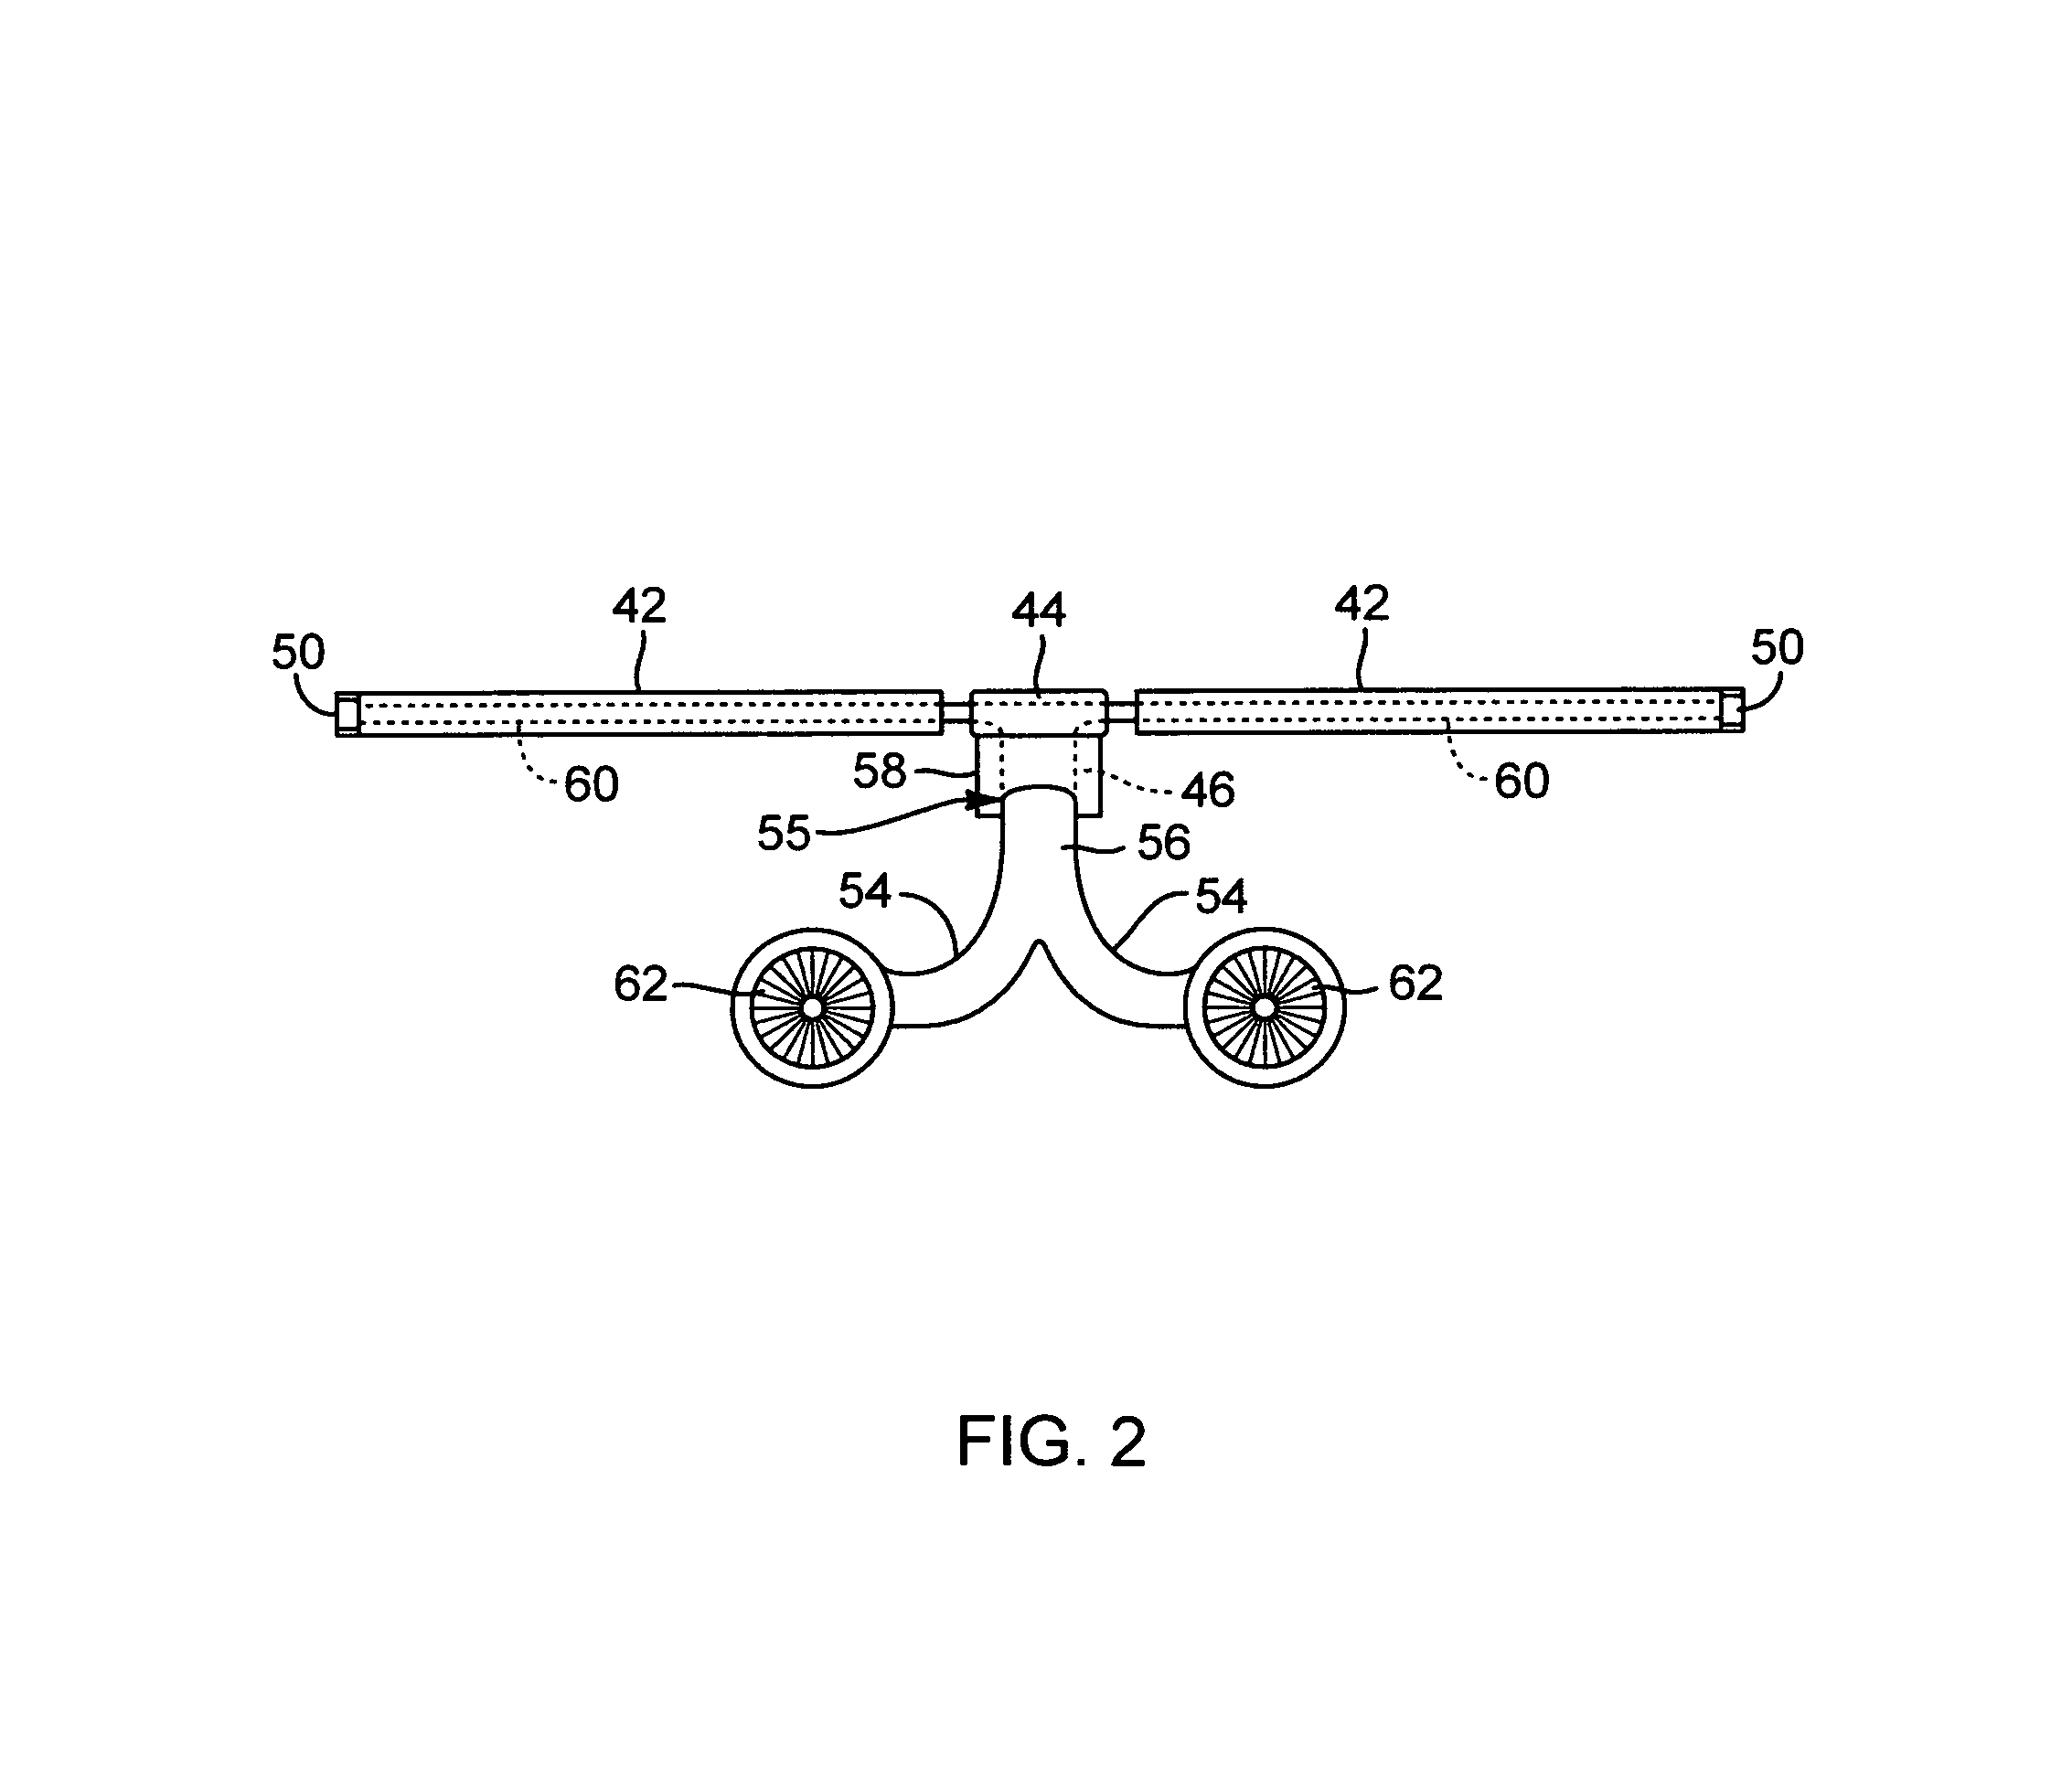 Rotor-mast-tilting apparatus and method for lower flapping loads